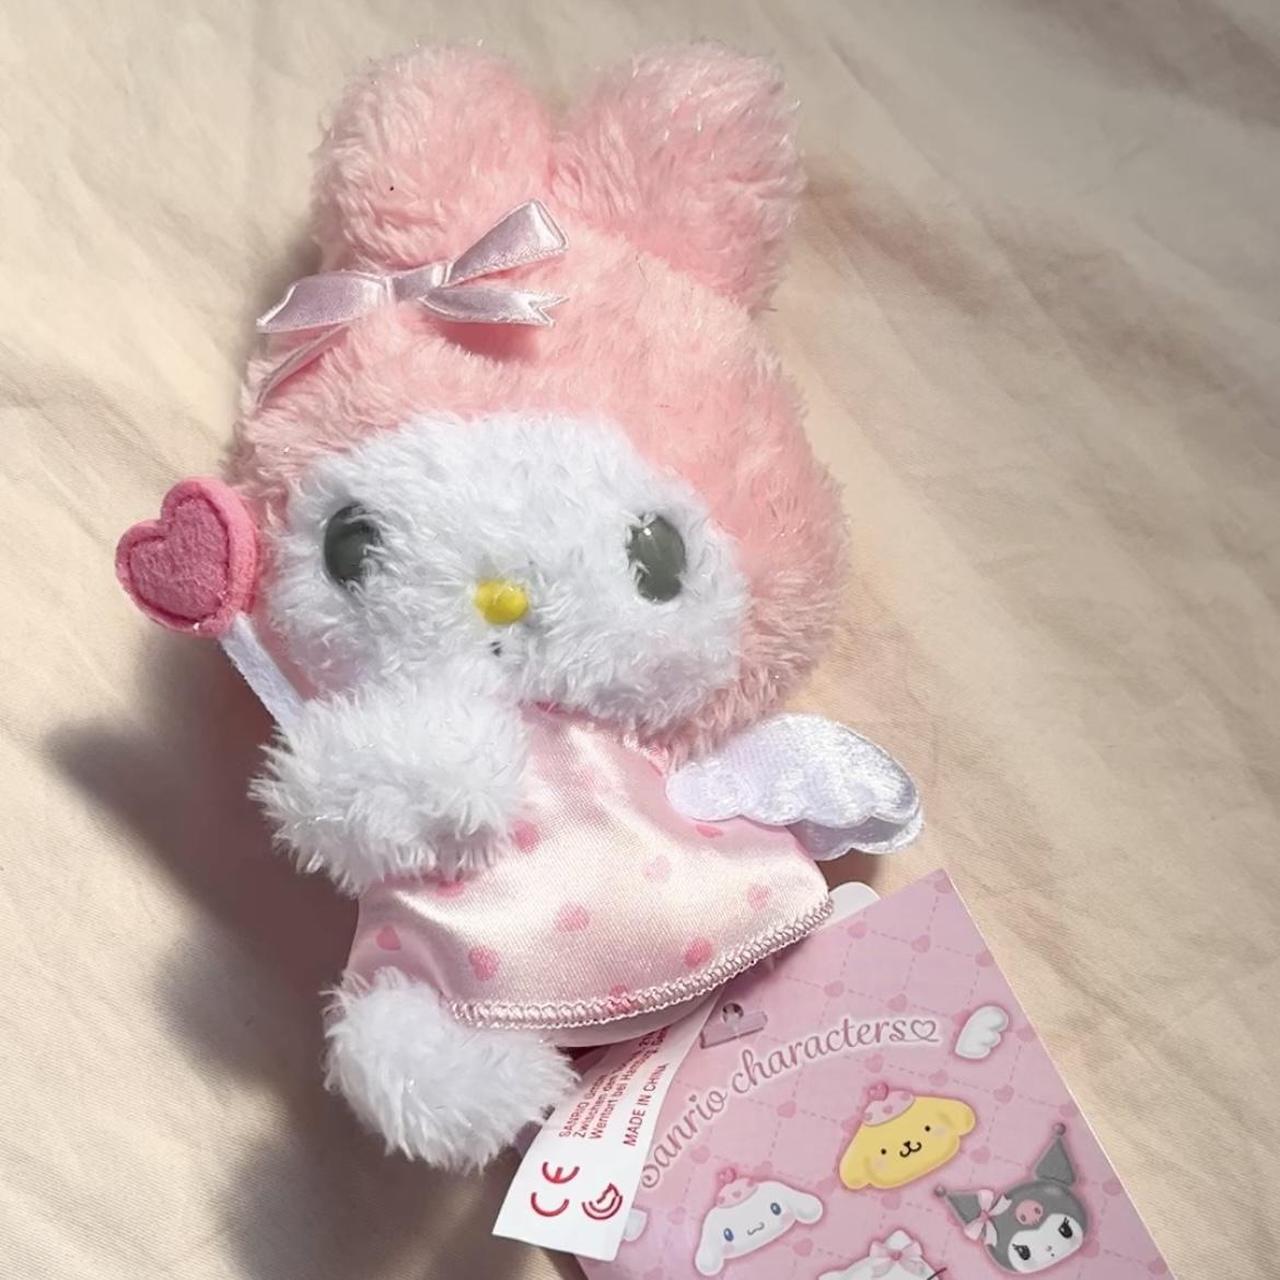 My melody dreaming angel plush keychain - sold out... - Depop